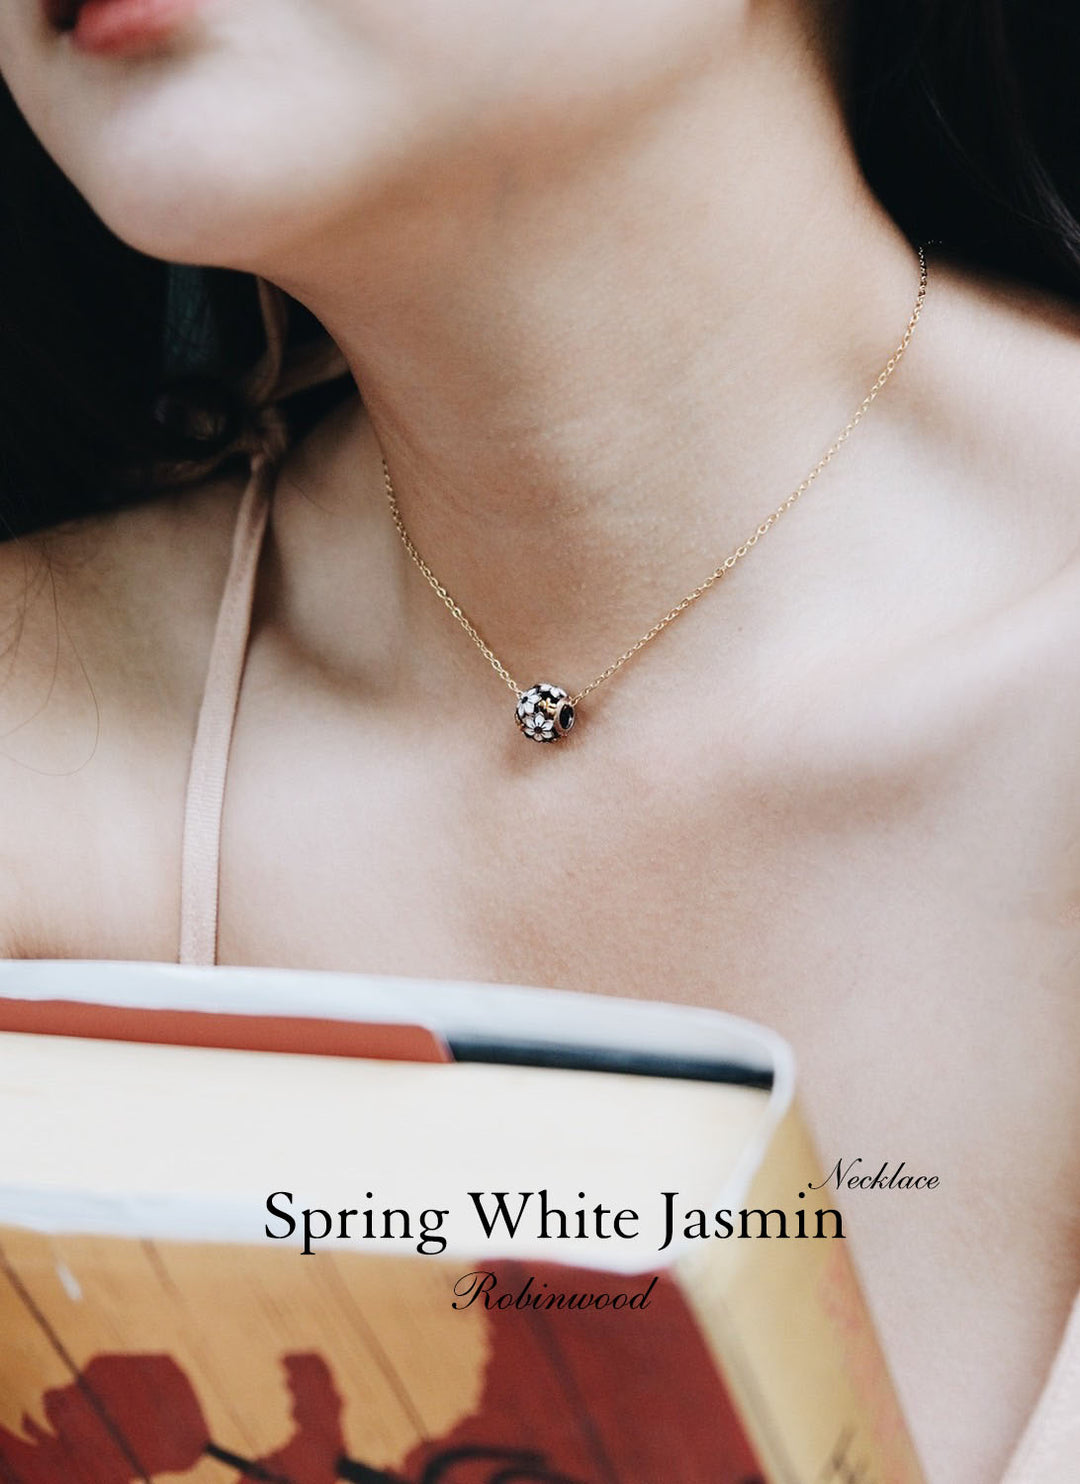 " Limited Collection's " Spring White Jasmin, Feeling Of Care & Love ", Robinwood